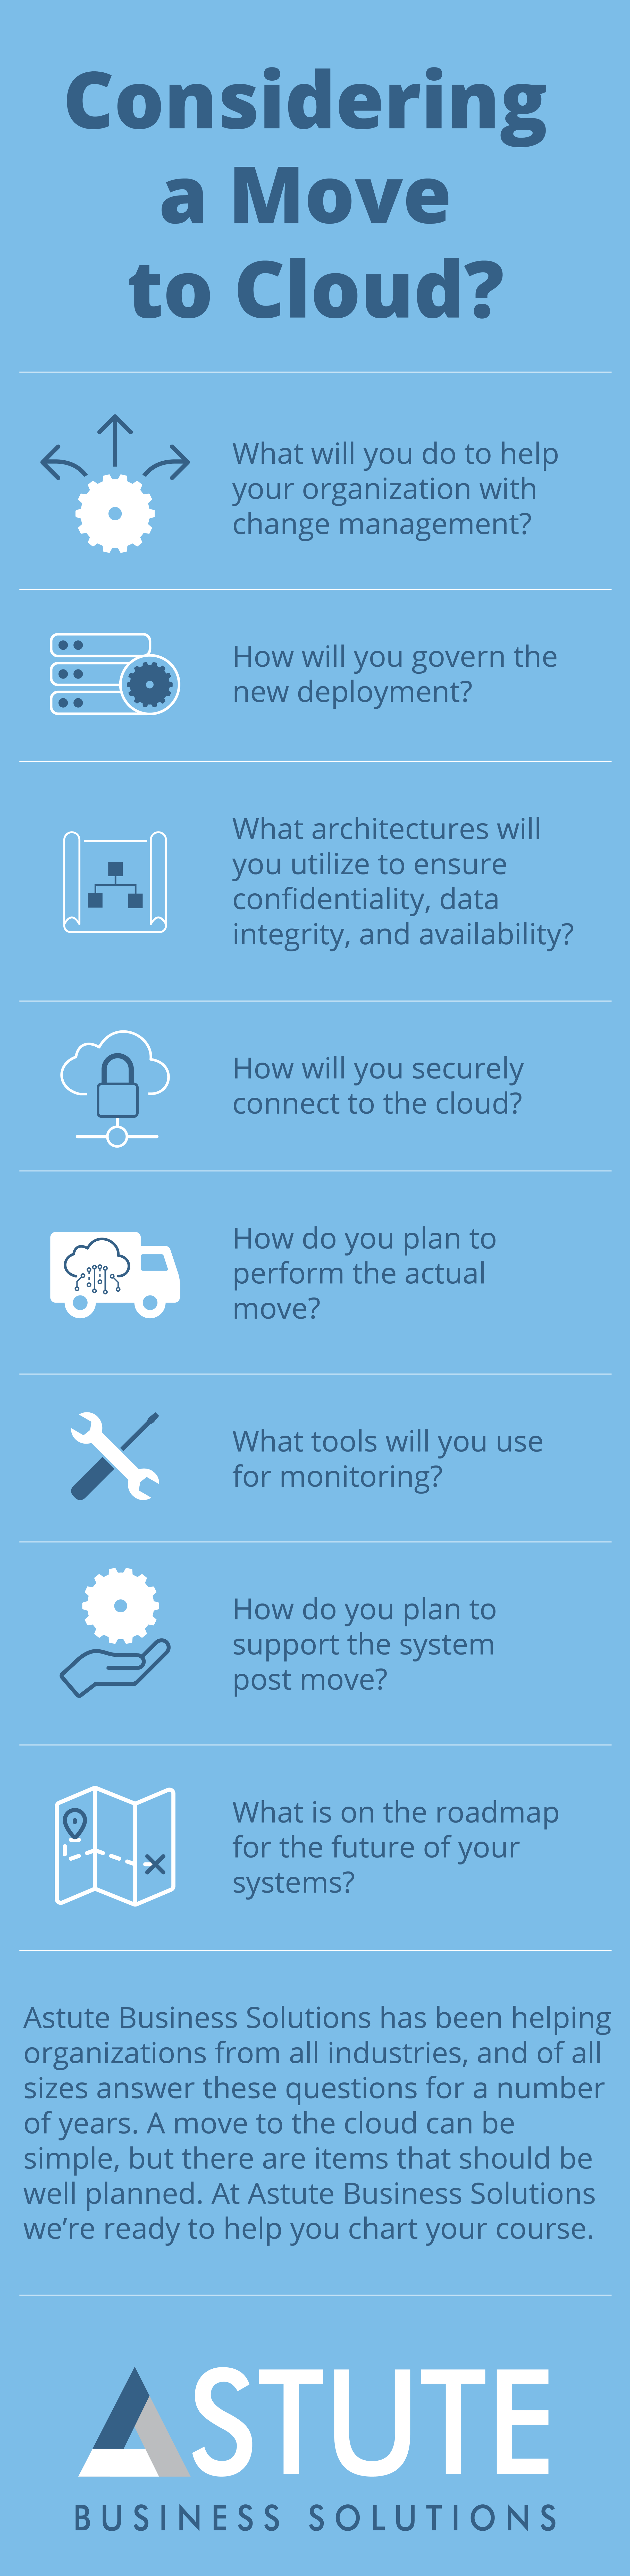 Eight Questions To Consider for Your Move to the Cloud